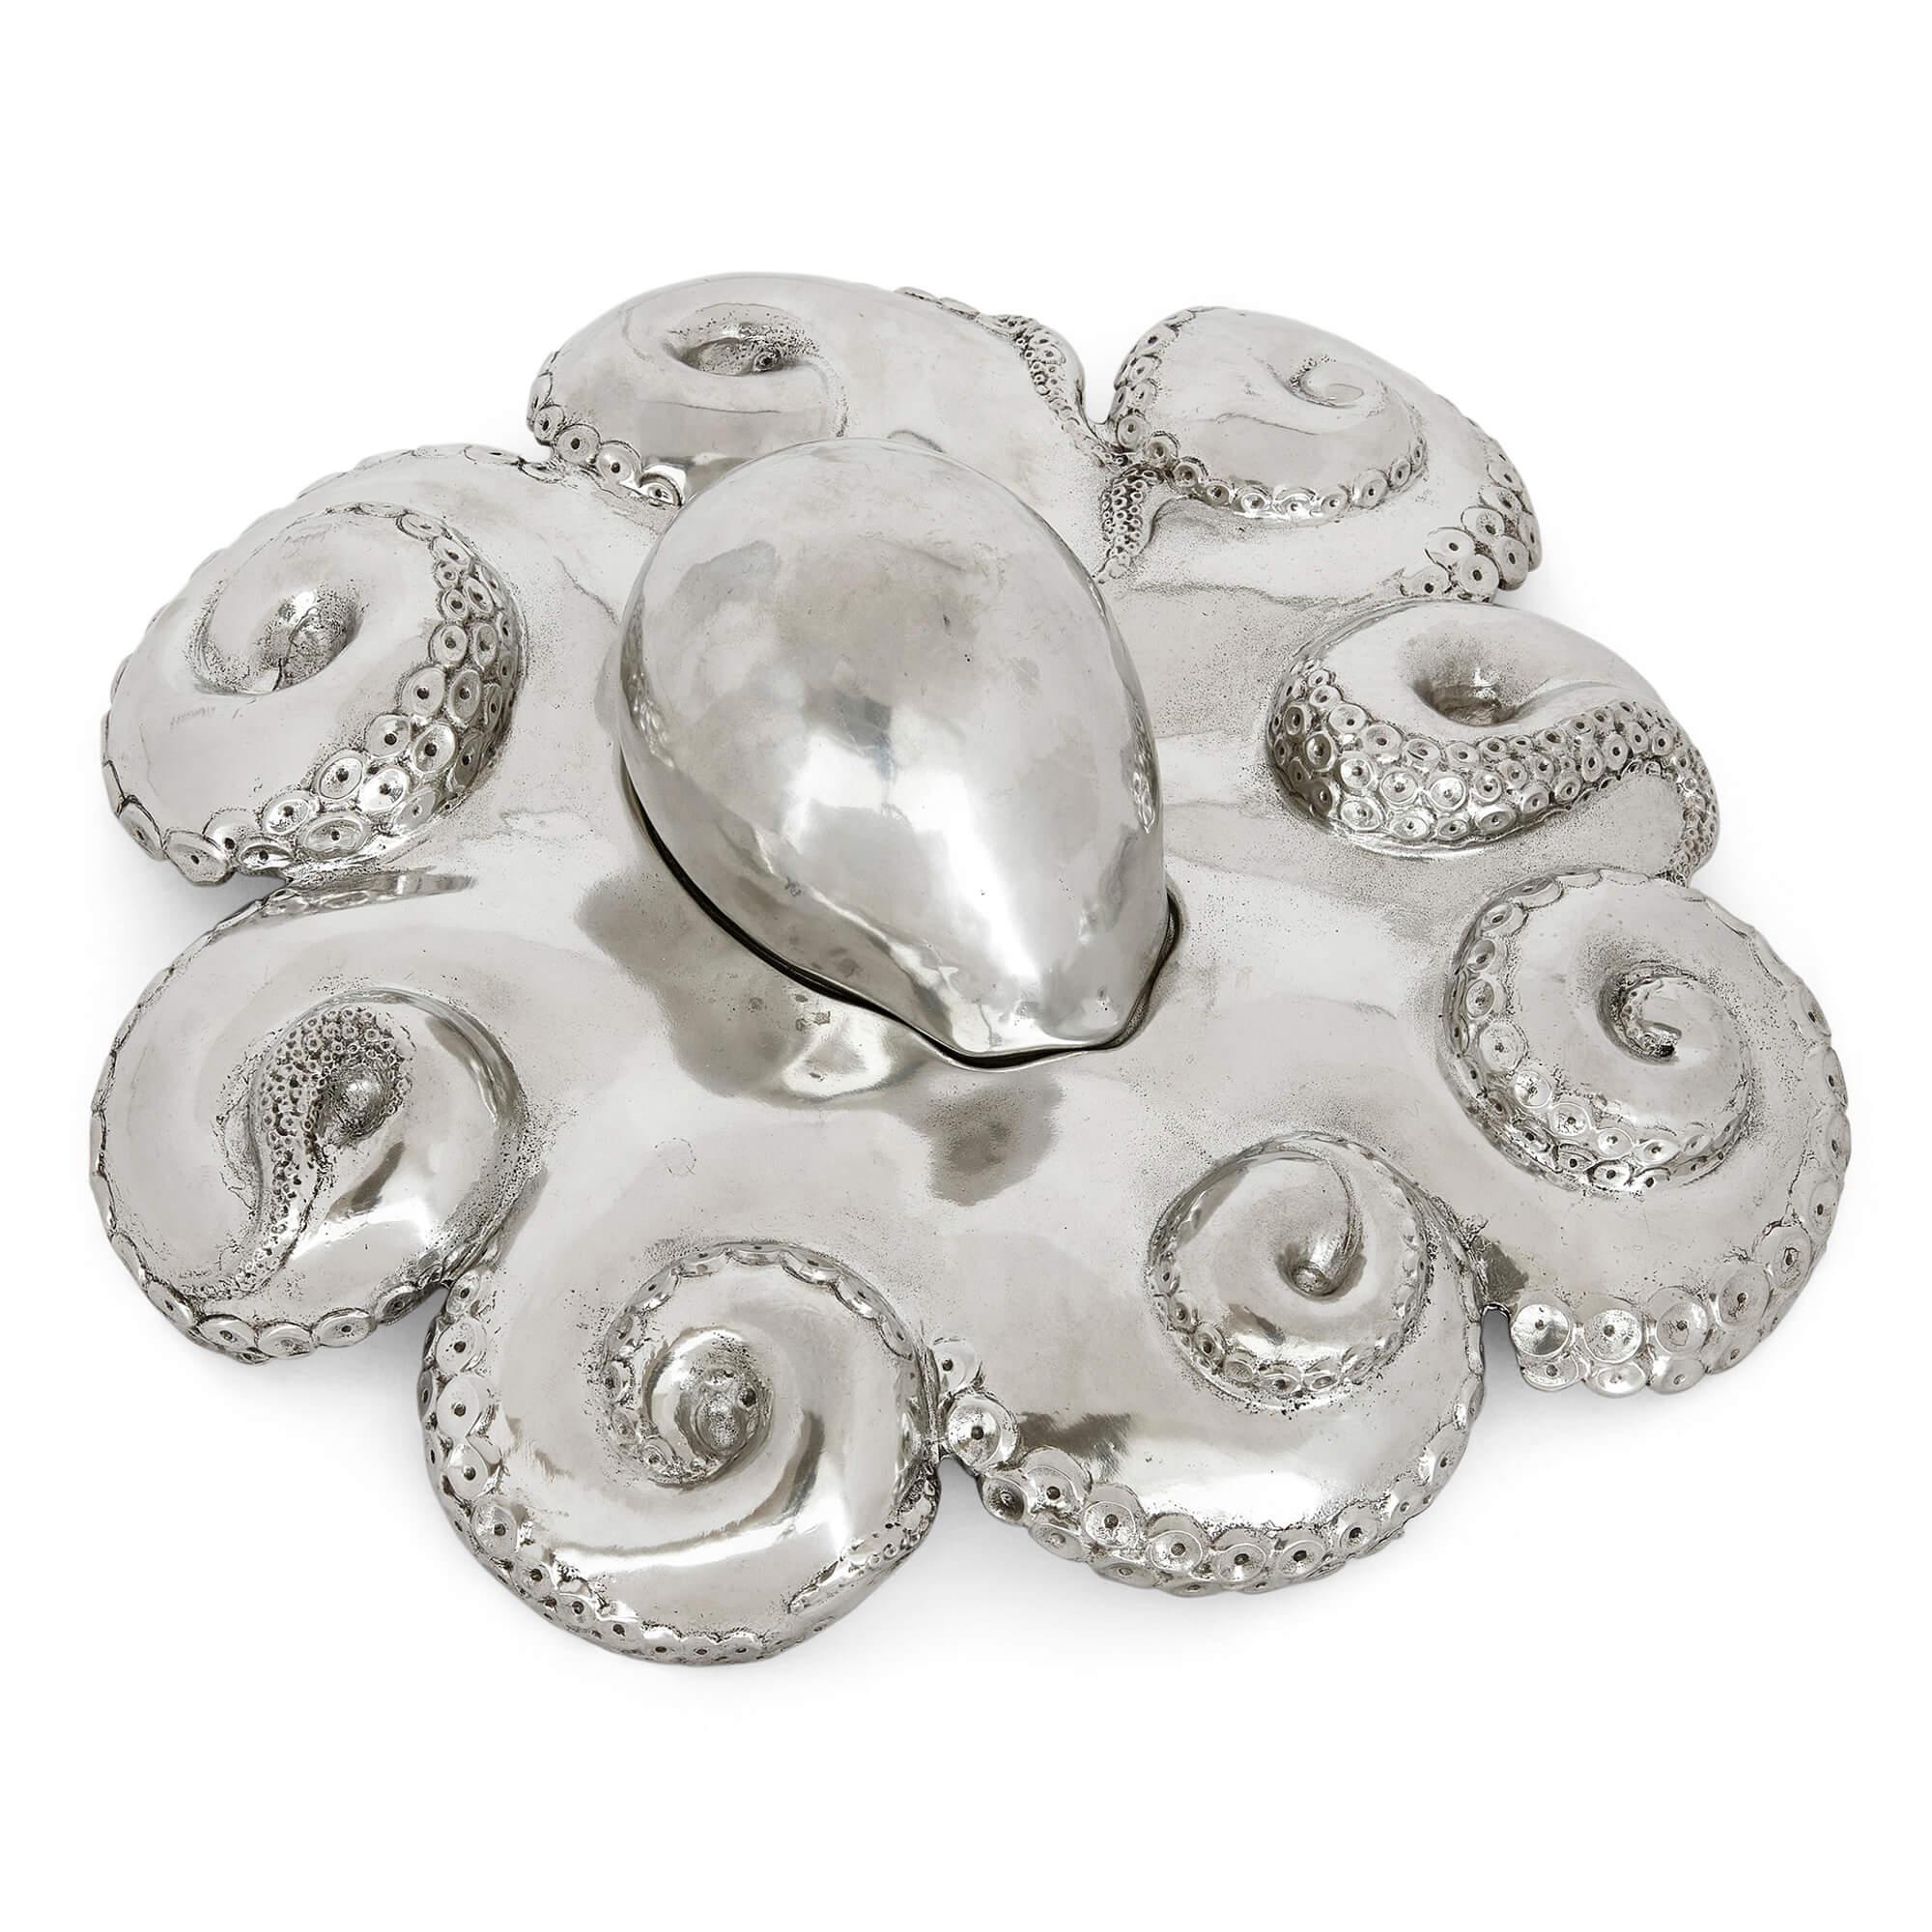 Large Italian Pewter octopus-form caviar dish by Piero Figura
Milan, Late 20th Century
Width: 38cm

This remarkable and unmissable piece is a pewter caviar-dish made by the Milanese craftsman Piero Figura, for the firm Atena, in Italy in the